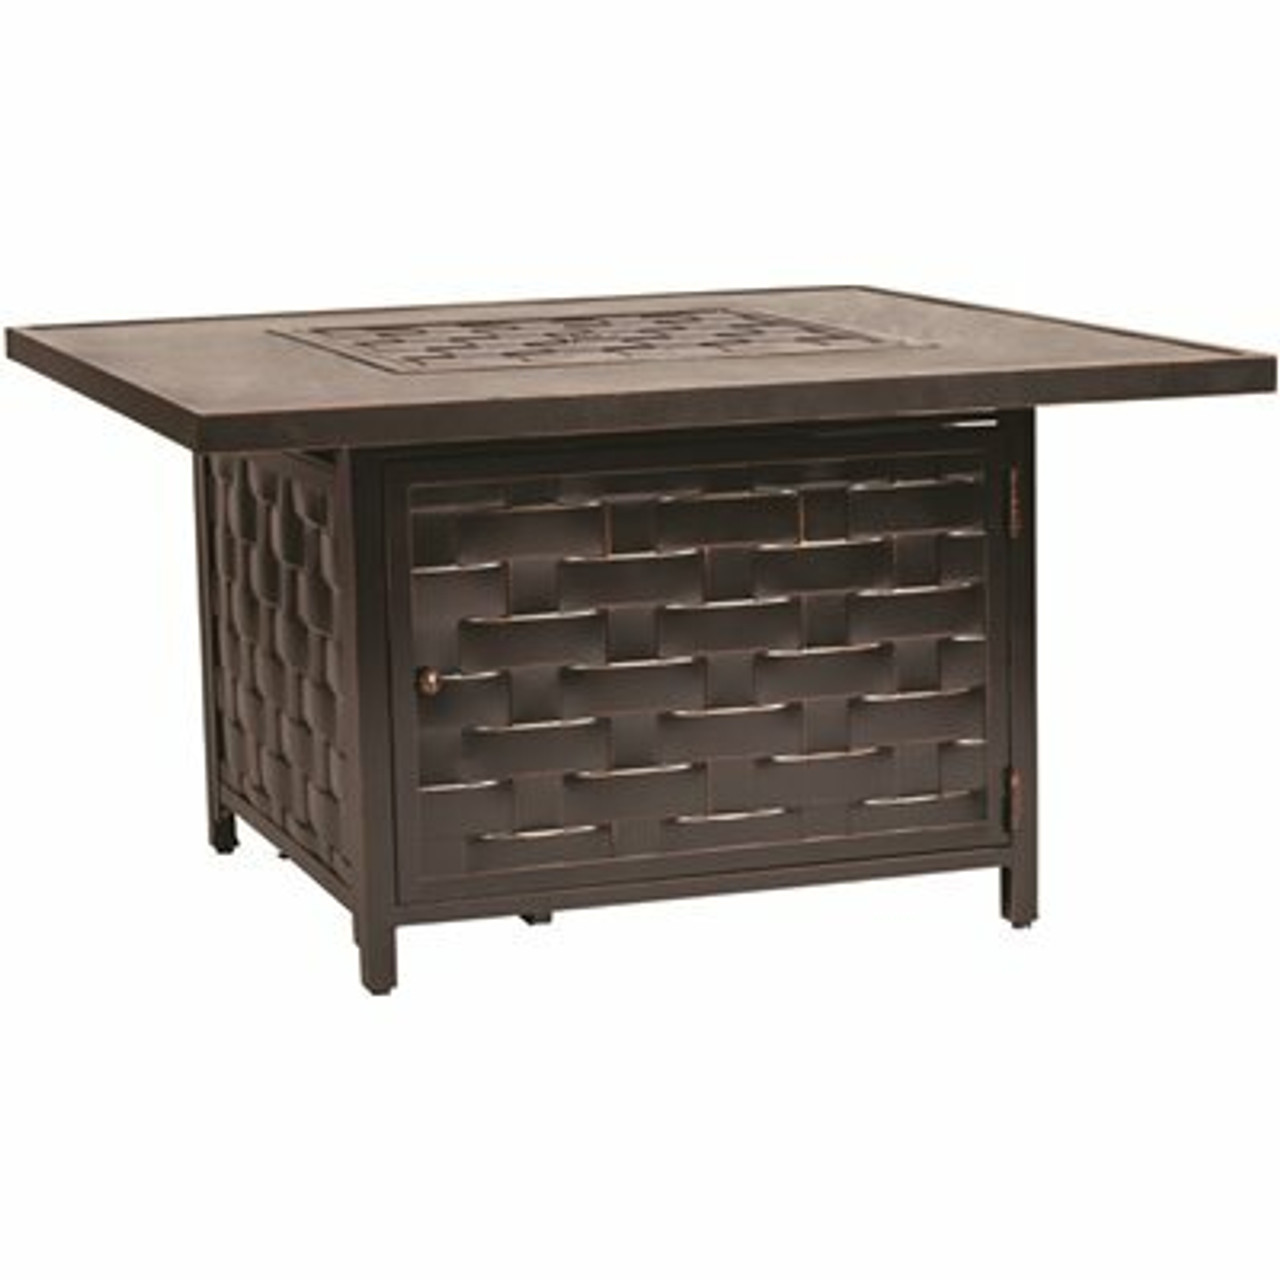 Fire Sense Armstrong 42 In. X 24 In. Square Cast Aluminum Lpg Fire Pit Table In Antique Bronze